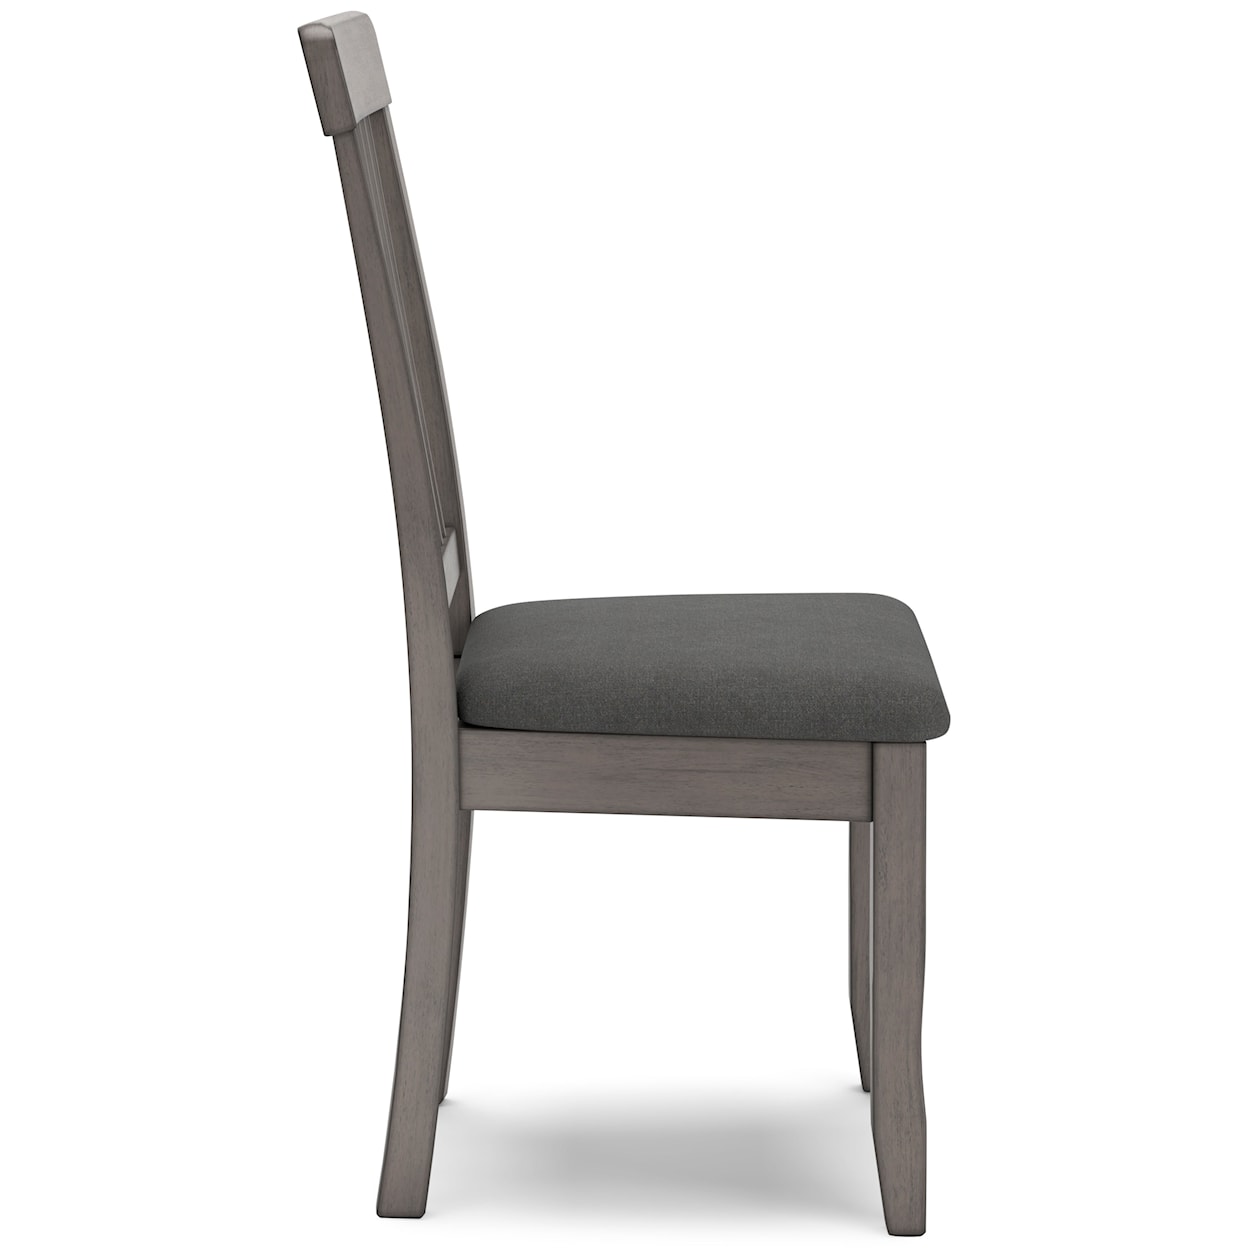 Signature Design by Ashley Furniture Shullden Dining Chair